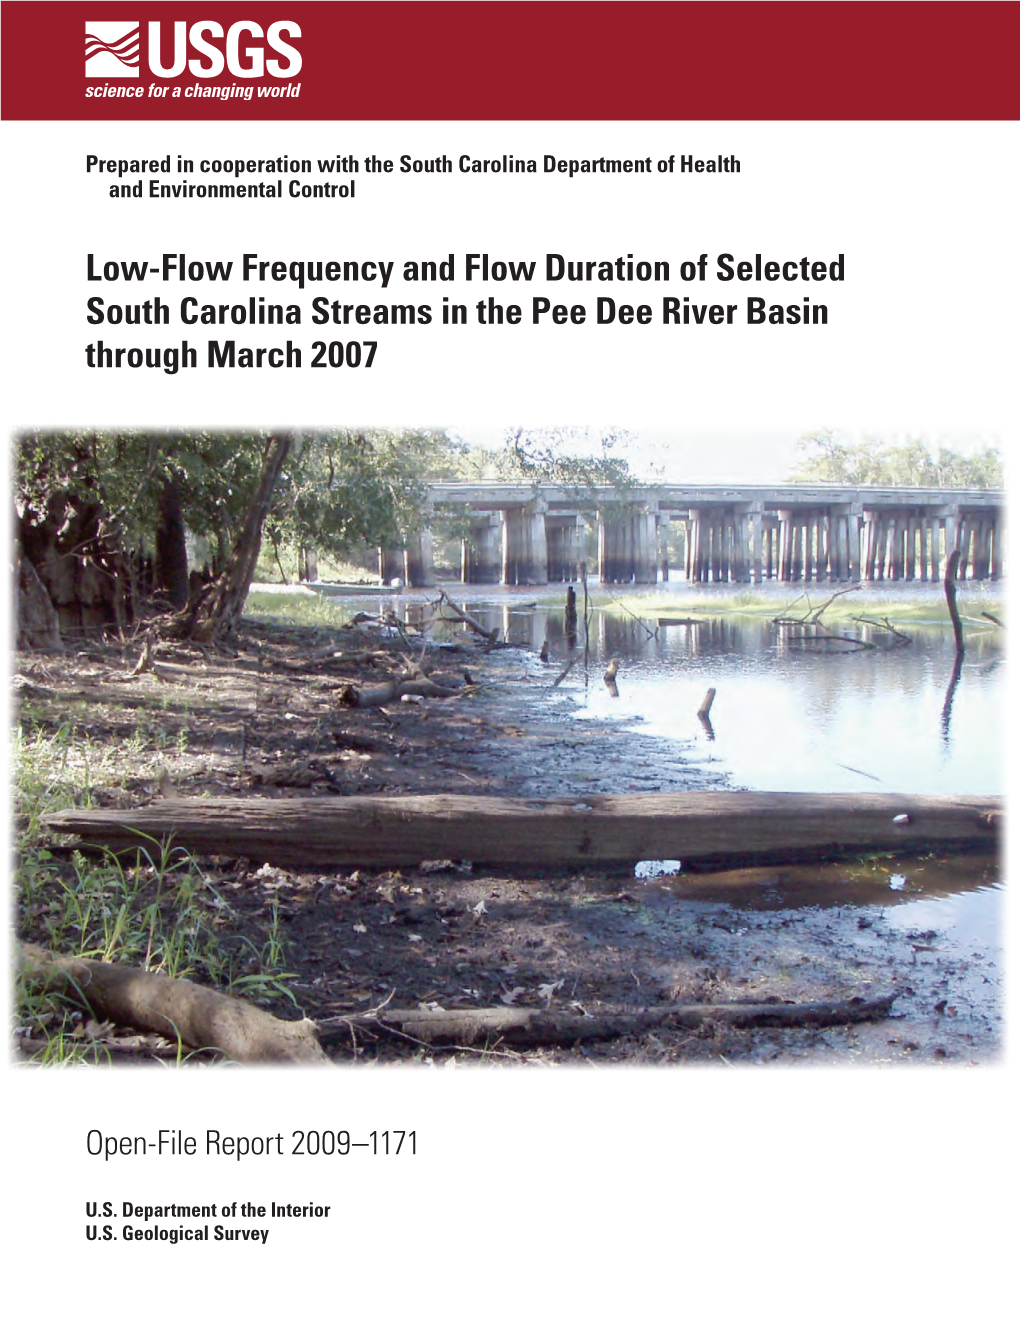 Low-Flow Frequency and Flow Duration of Selected South Carolina Streams in the Pee Dee River Basin Through March 2007